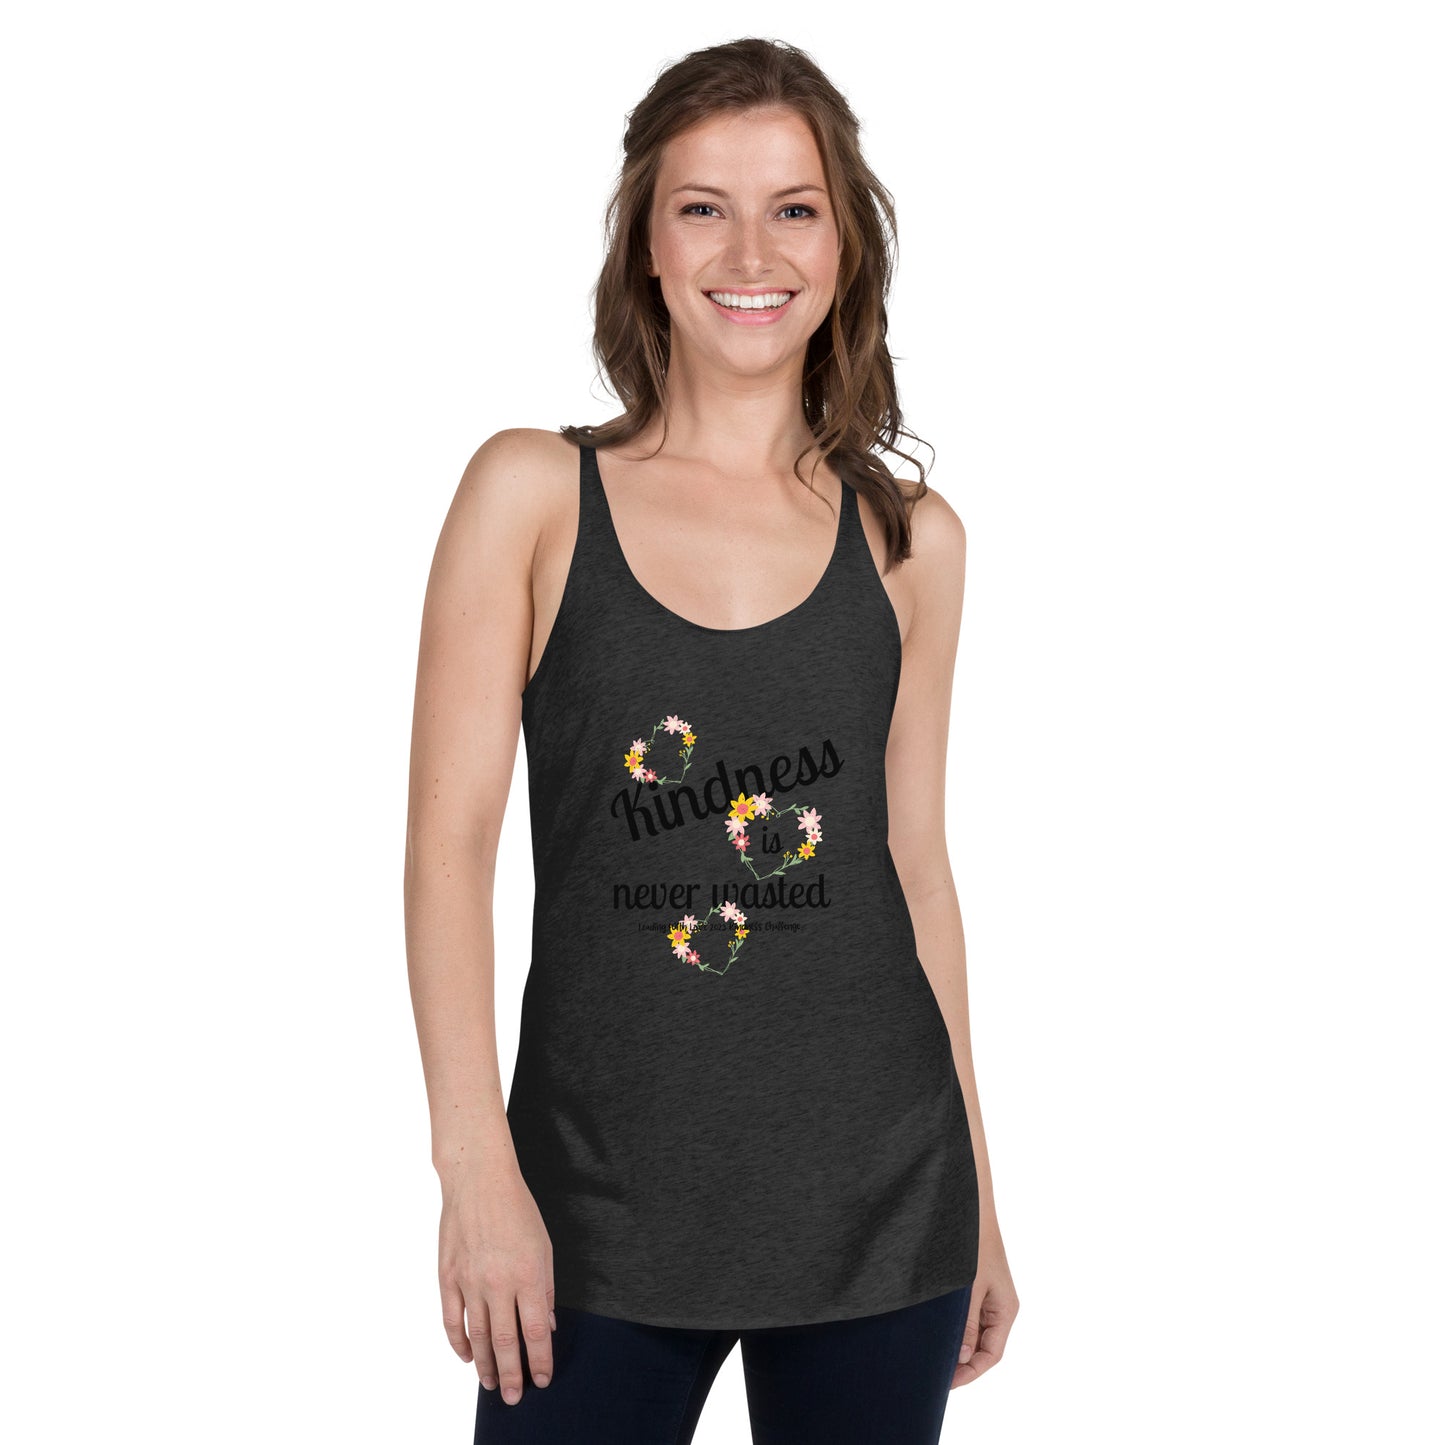 Kindness is Never Wasted Women's Racerback Tank